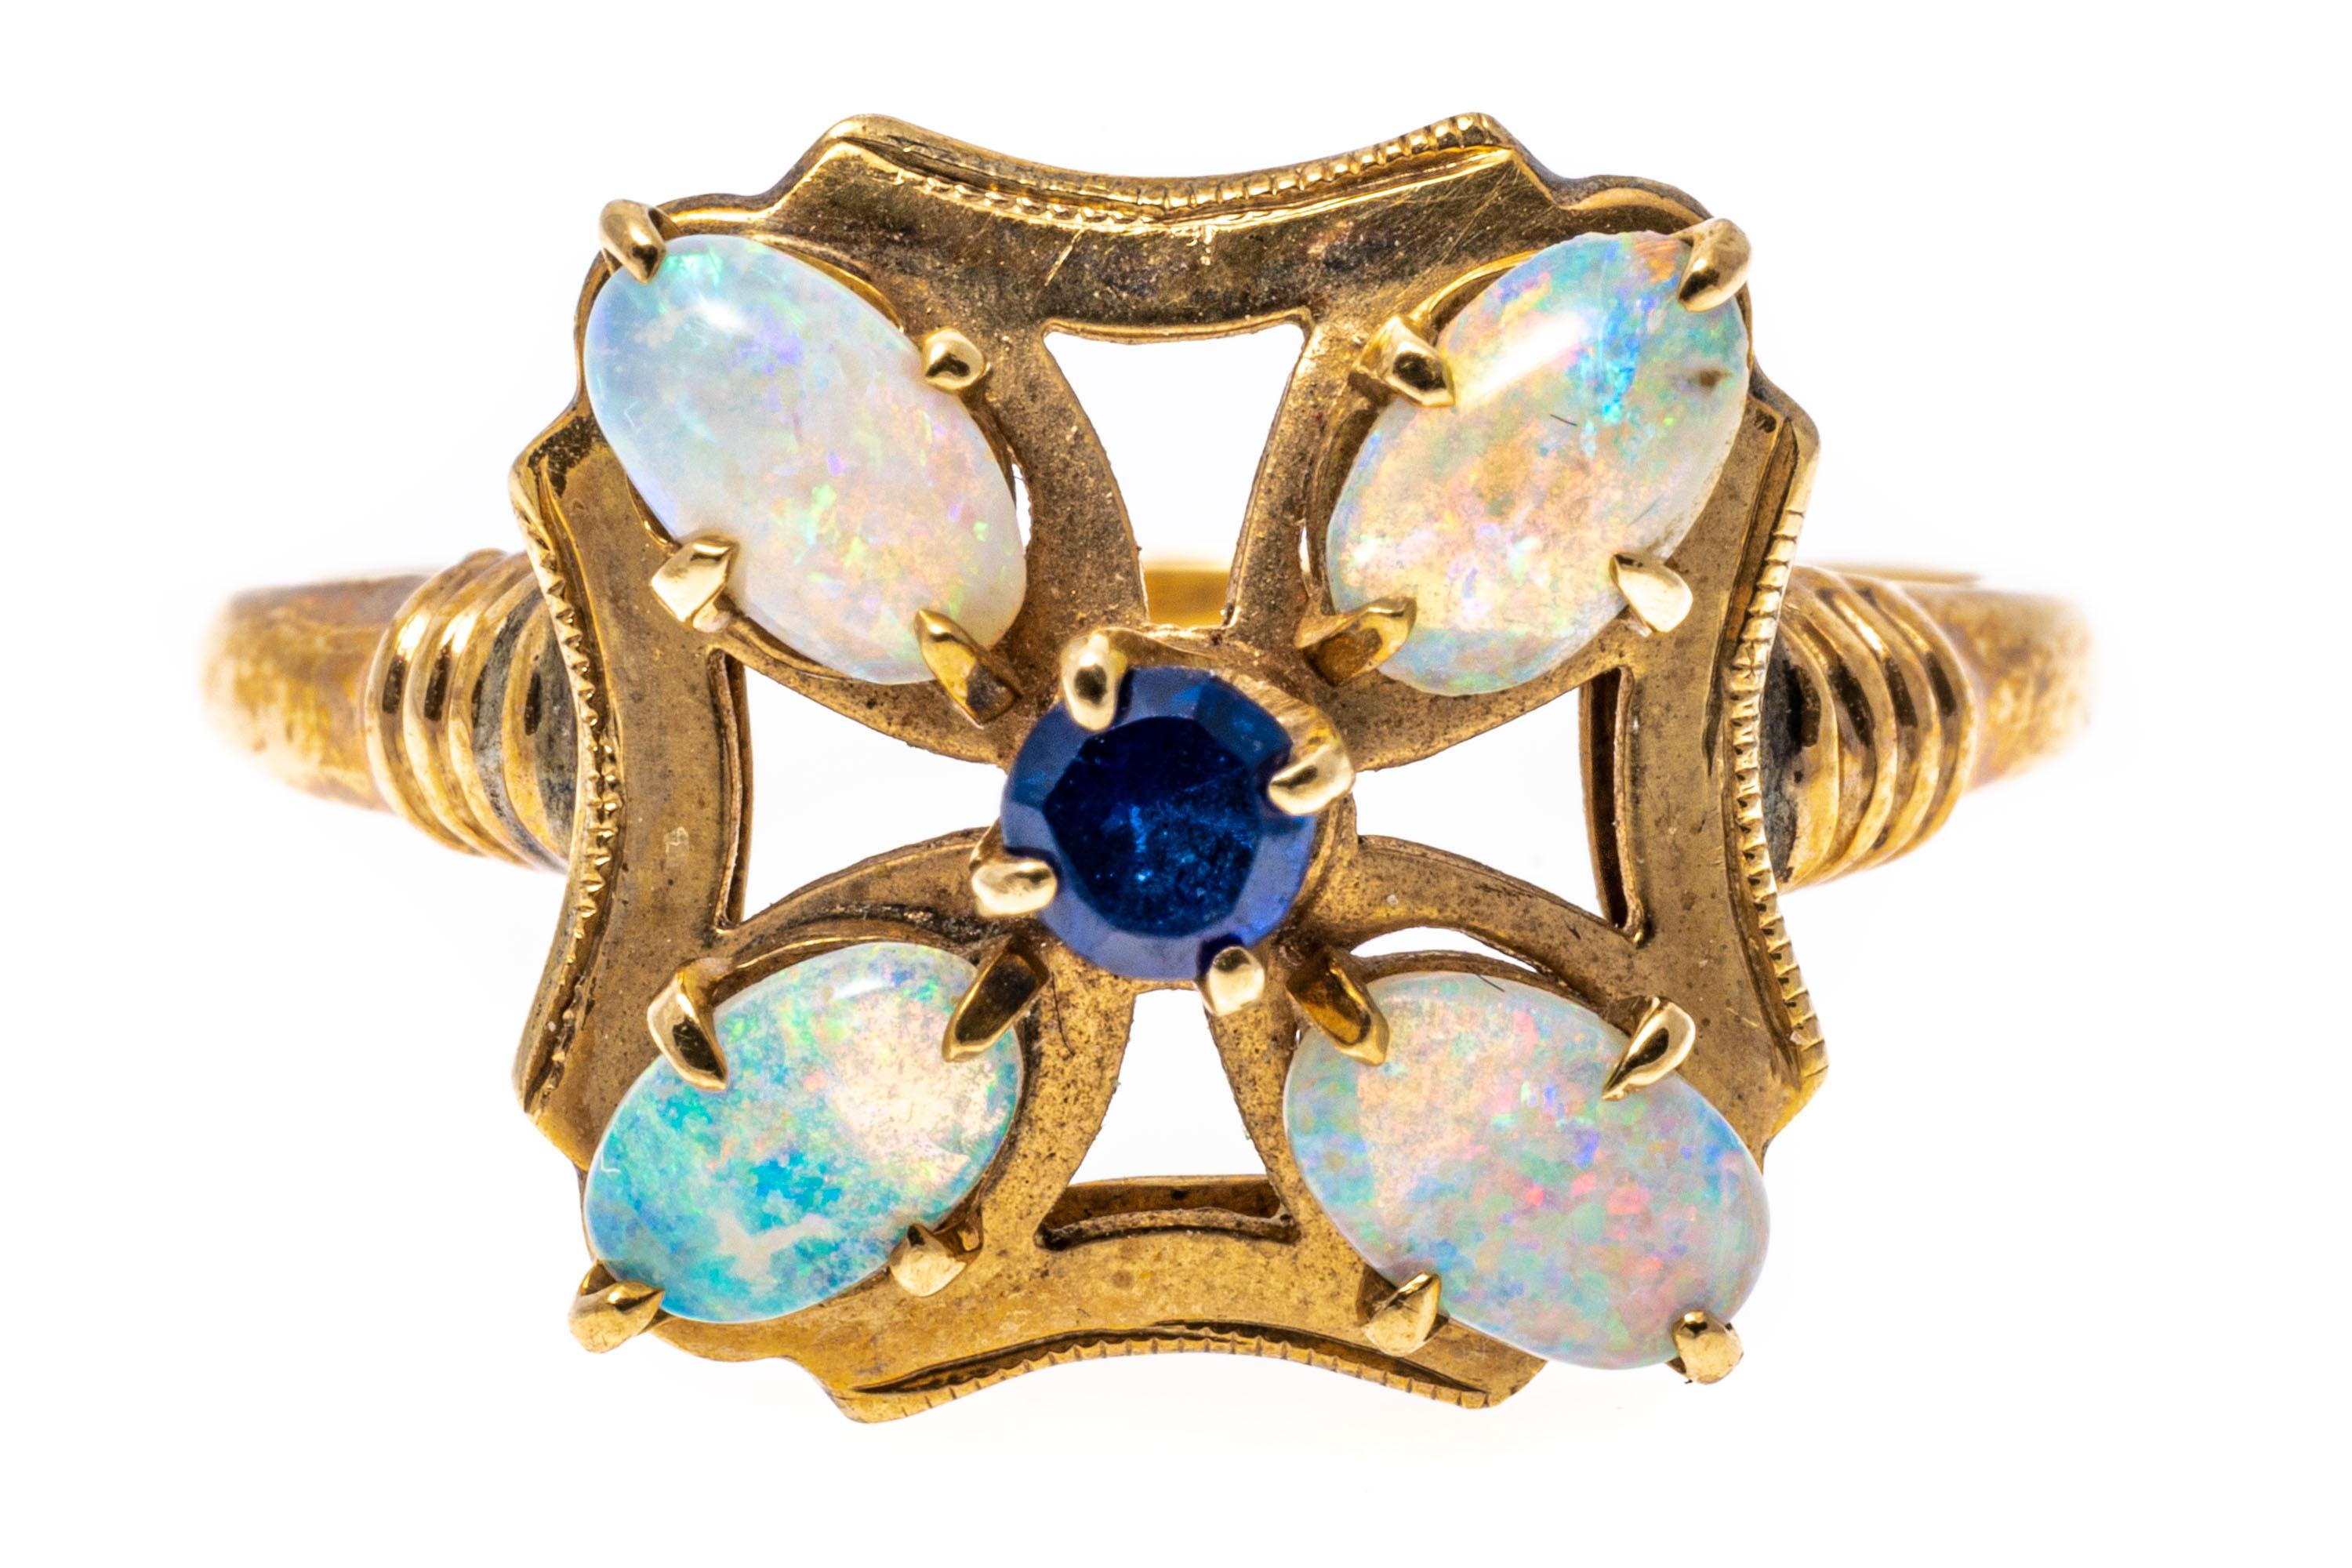 10k yellow gold ring. This charming ring is a flower form, set with four oval cabachon cut white opals, approximately 0.32 TCW, which center a round faceted, medium blue color sapphire, approximately 0.14 CTS. All of the stones are prong set.
Marks: